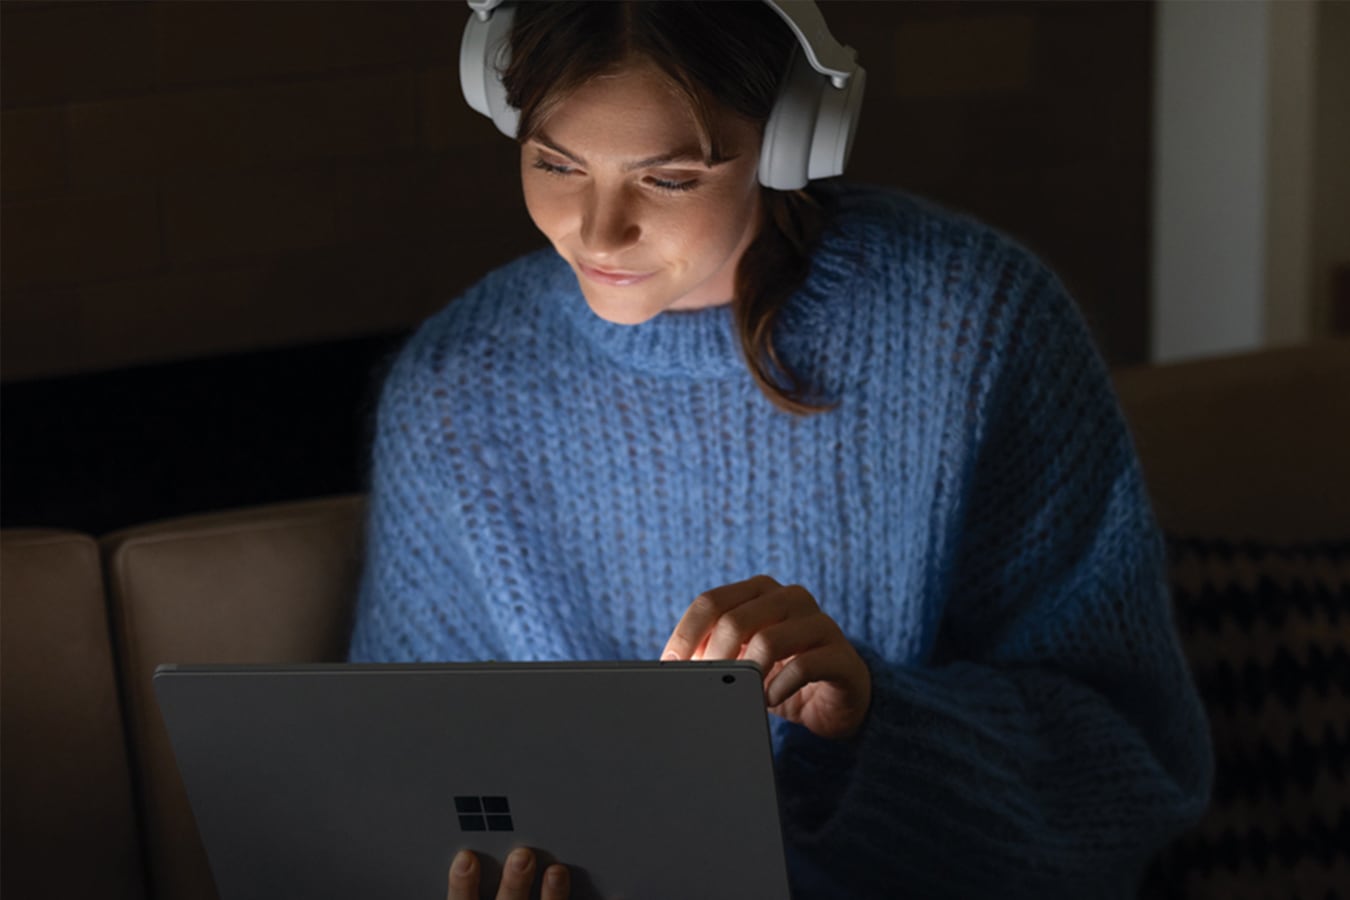 A woman listens to a film with headphones